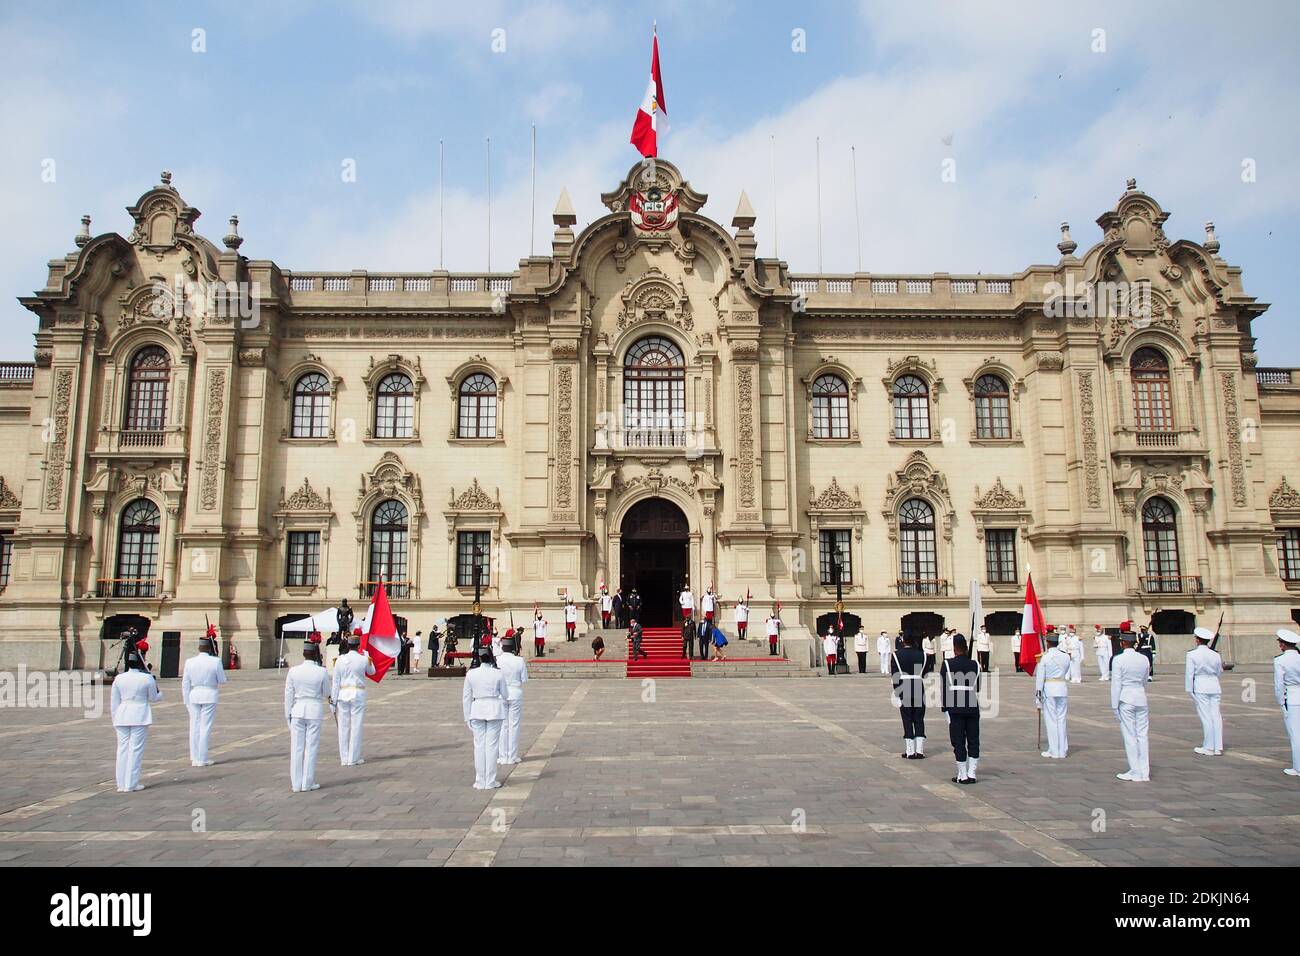 Military parade in the courtyard of the government palace at the ceremony of awarding the Sword of Honour to the officers, recently graduated, who occupied the first position of their class in the training schools of the Armed Forces. Stock Photo